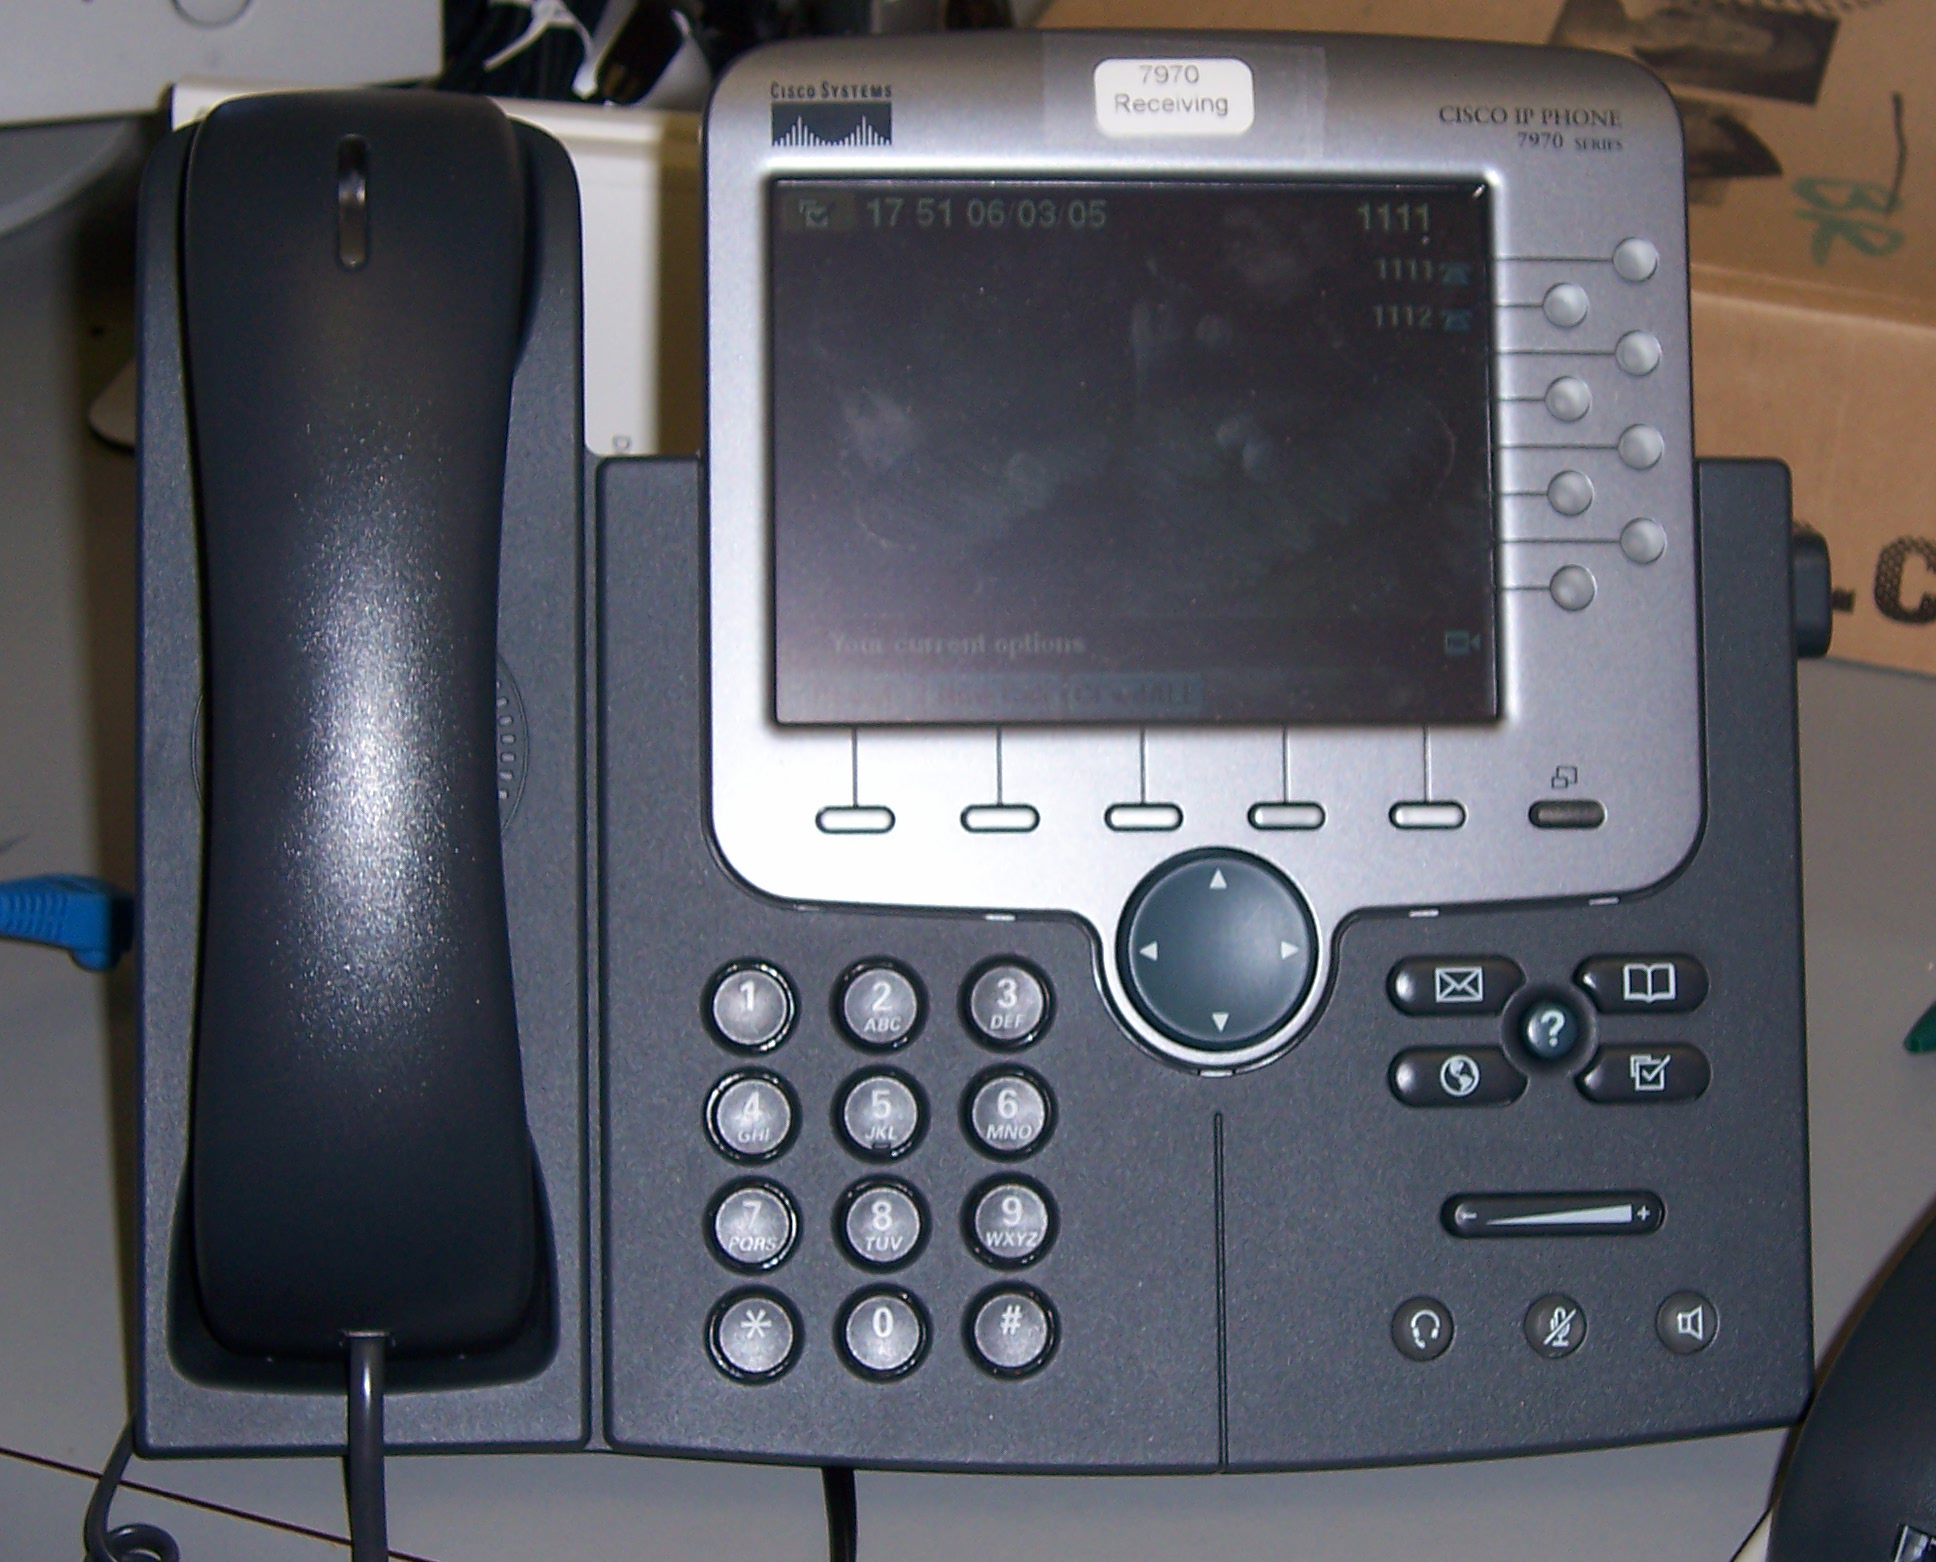 Image of a VoIP phone. It looks like a typical phone with a handset and buttons, but also has a screen.